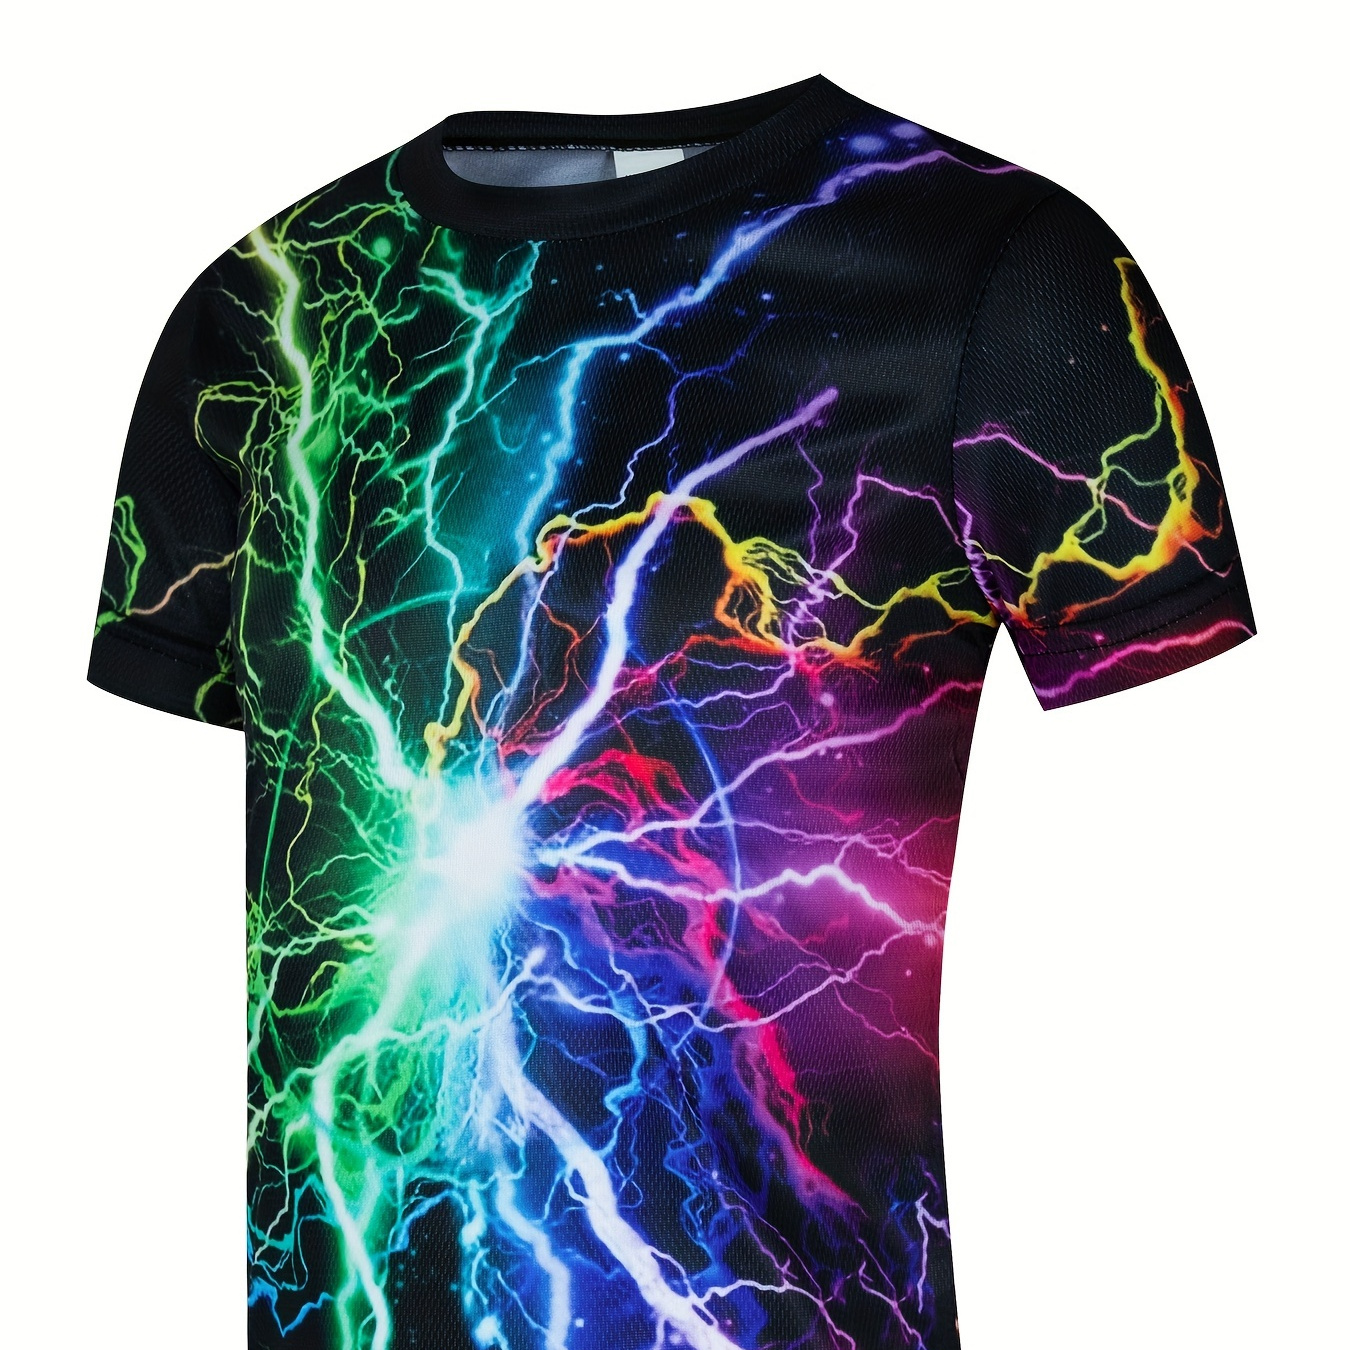 

Cool & Colorful Lightning Graphic - Perfect For Summer Outdoors!